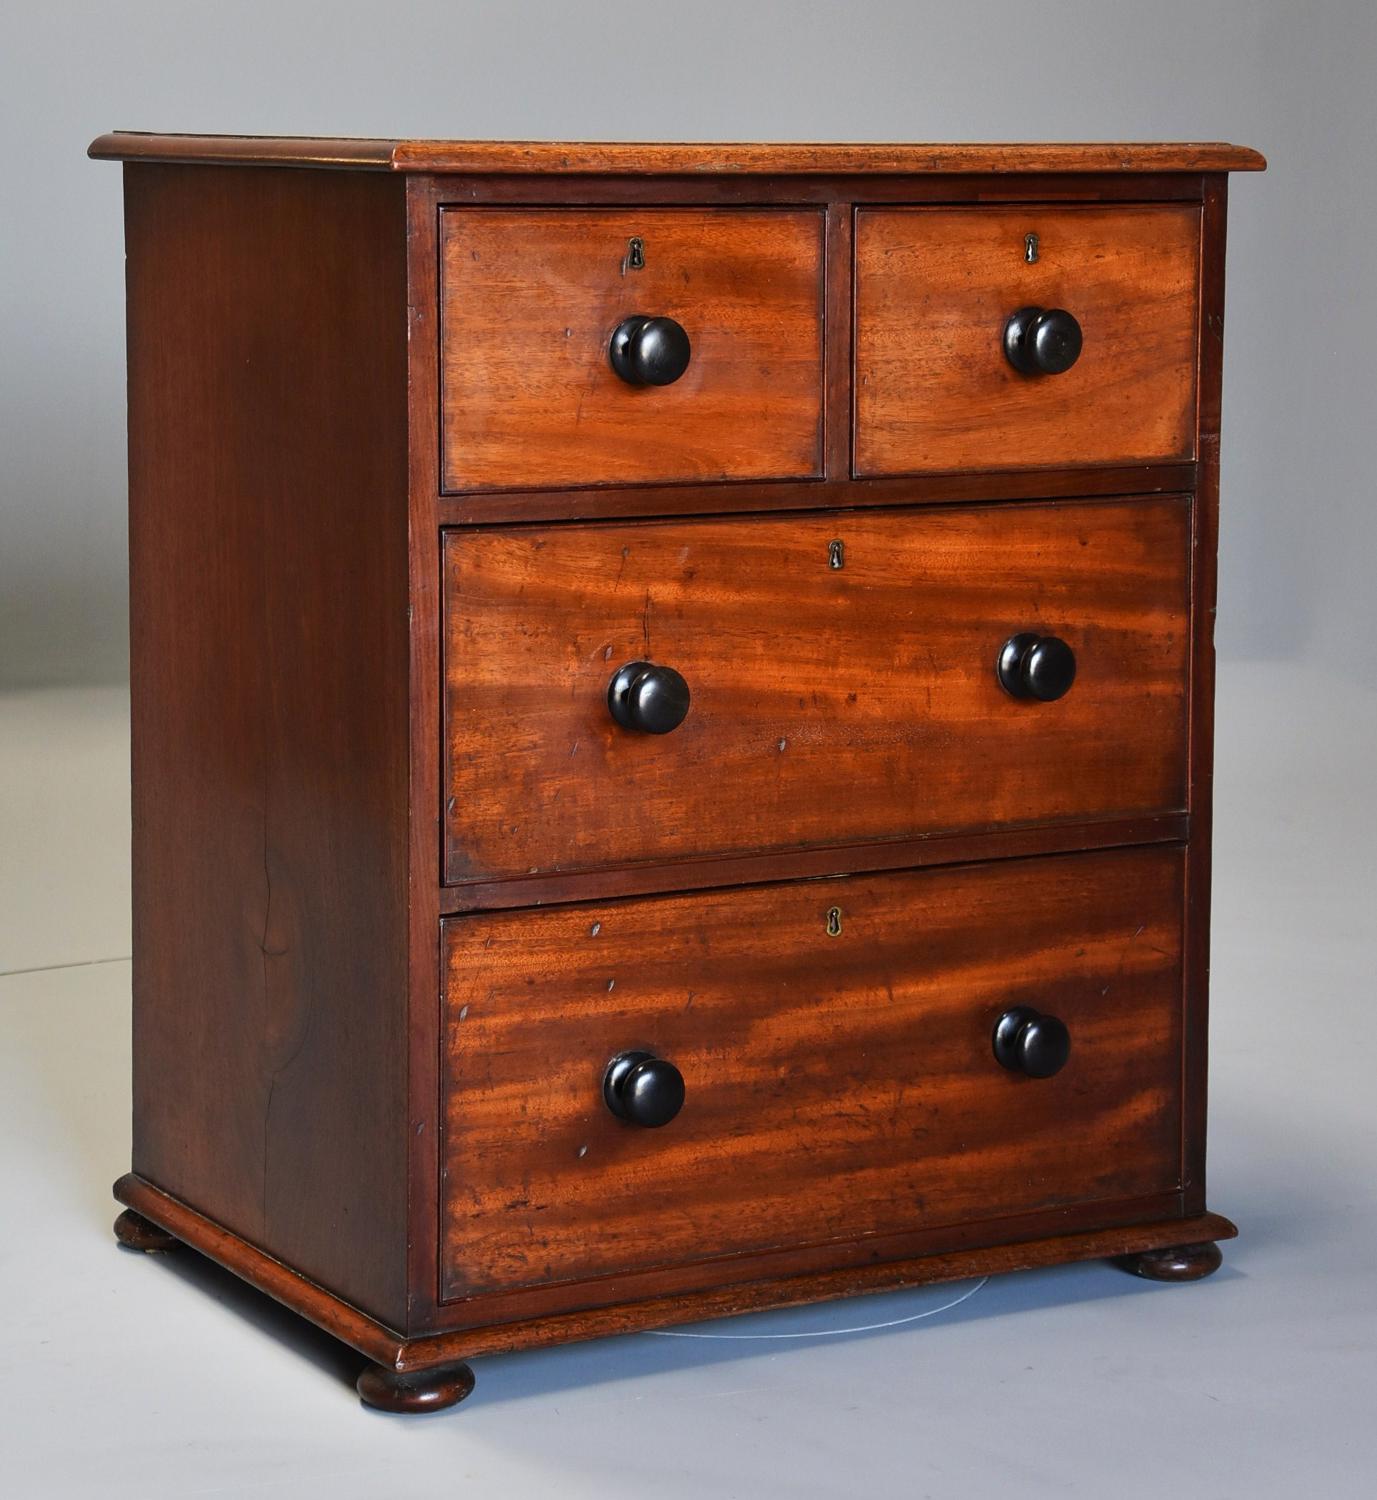 Mid 19th century small mahogany chest of drawers